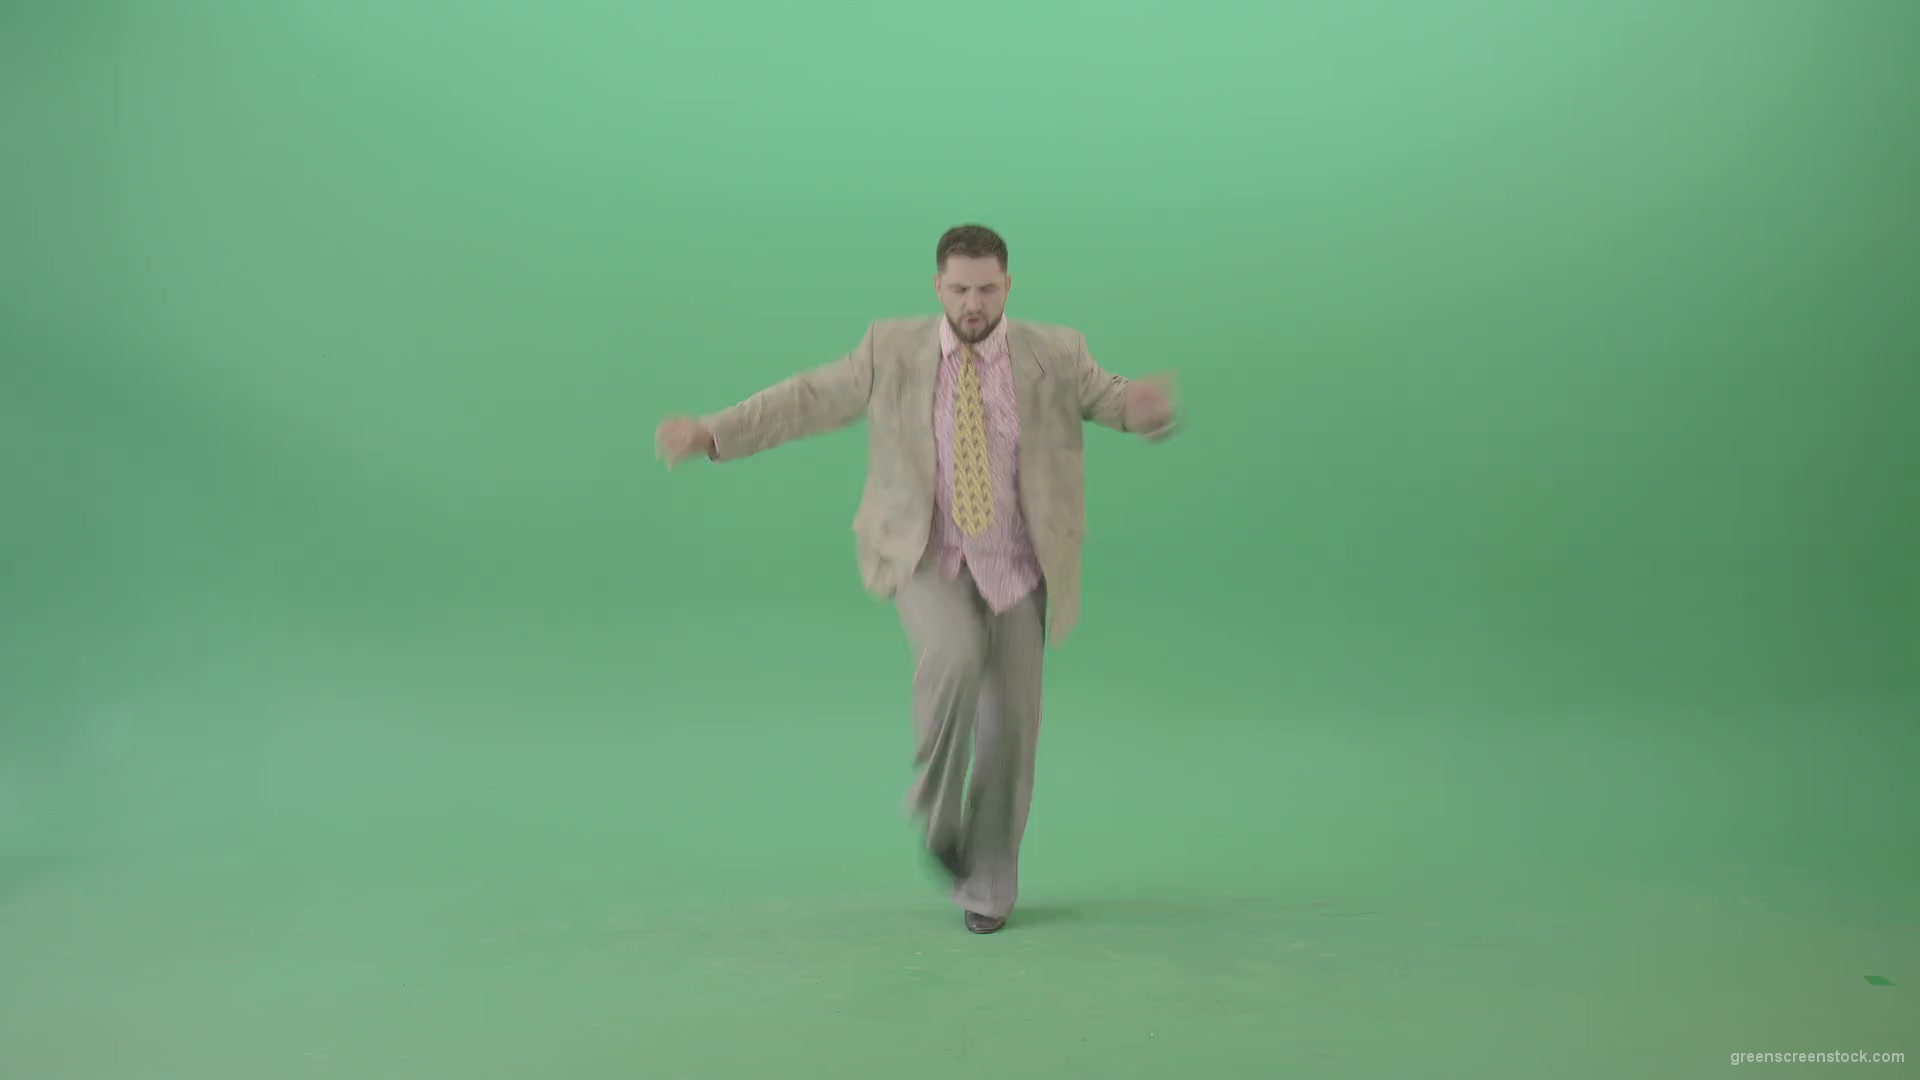 Man-dancing-shuffle-jazz-swing-Boogie-woogie-and-jumping-isolated-over-Green-Screen-4K-Video-Footage-1920_001 Green Screen Stock